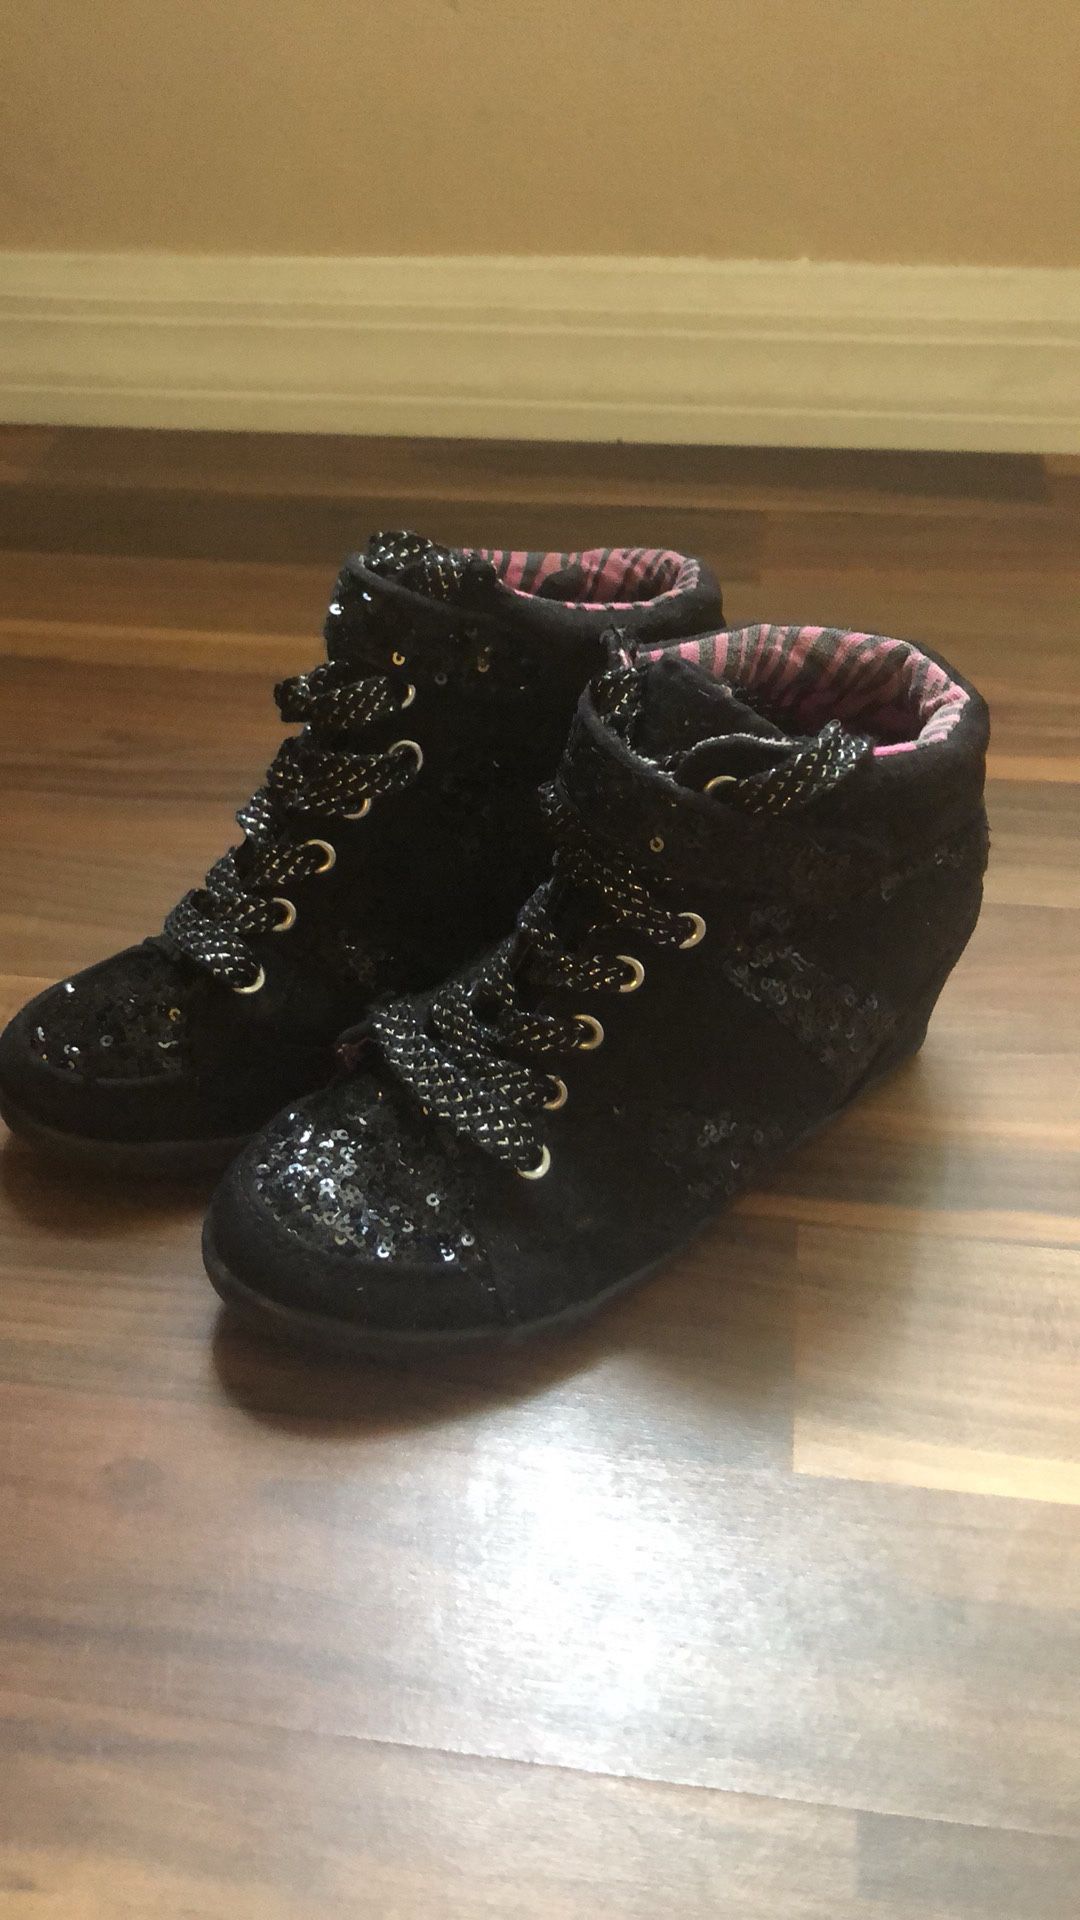 Girls Justice Boots size 1 kids black with sequins